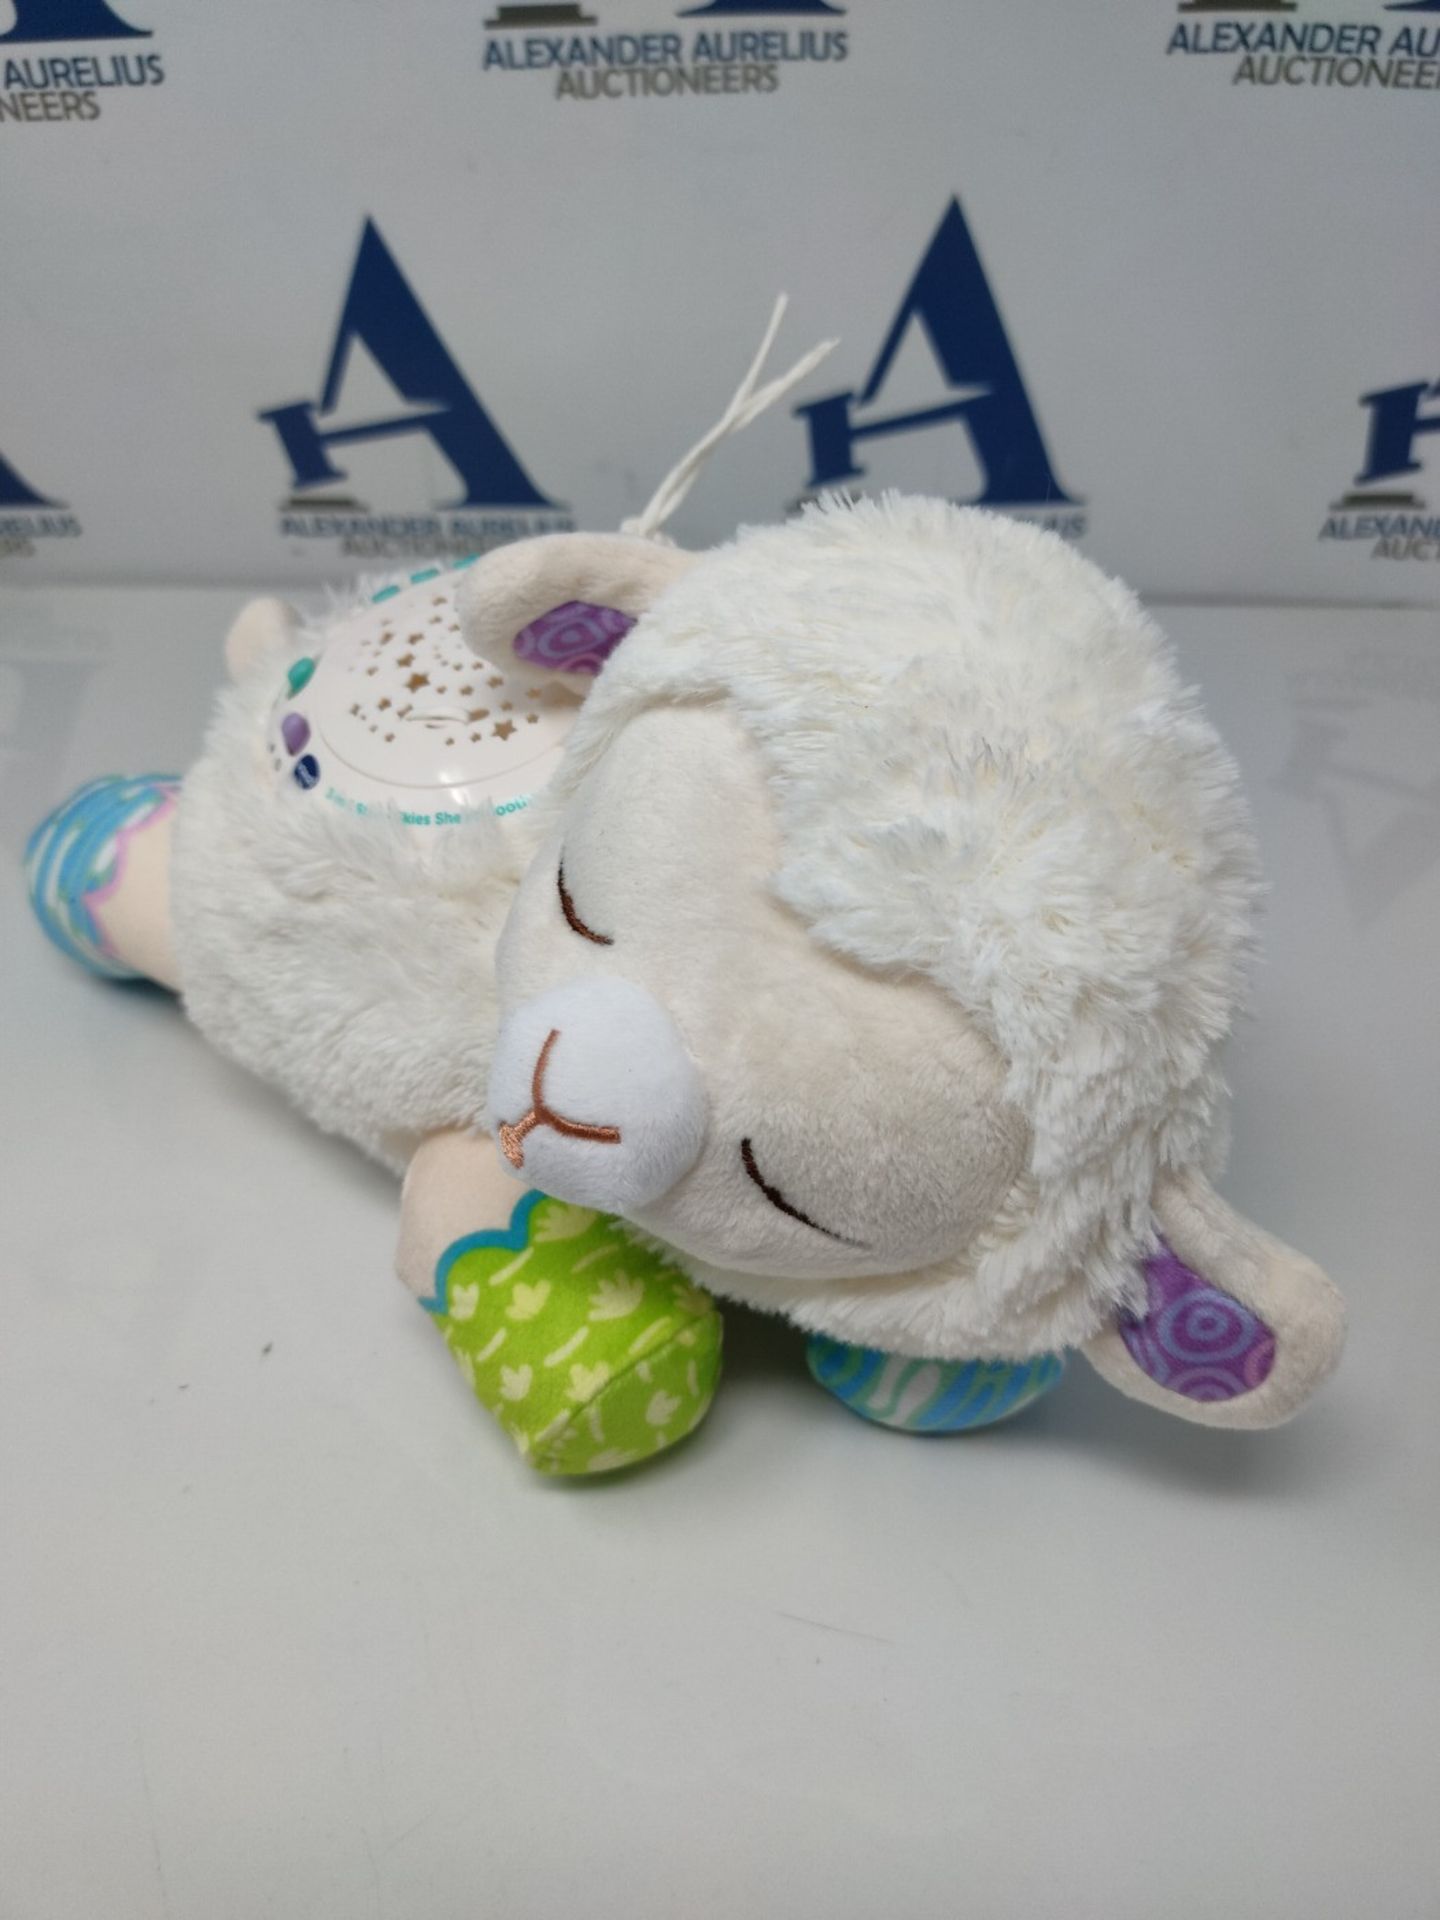 VTech 550503 Baby 3-in-1 Starry Skies Sheep Soother, Multi, 12.1 x 31.9 x 15 cm - Image 3 of 3